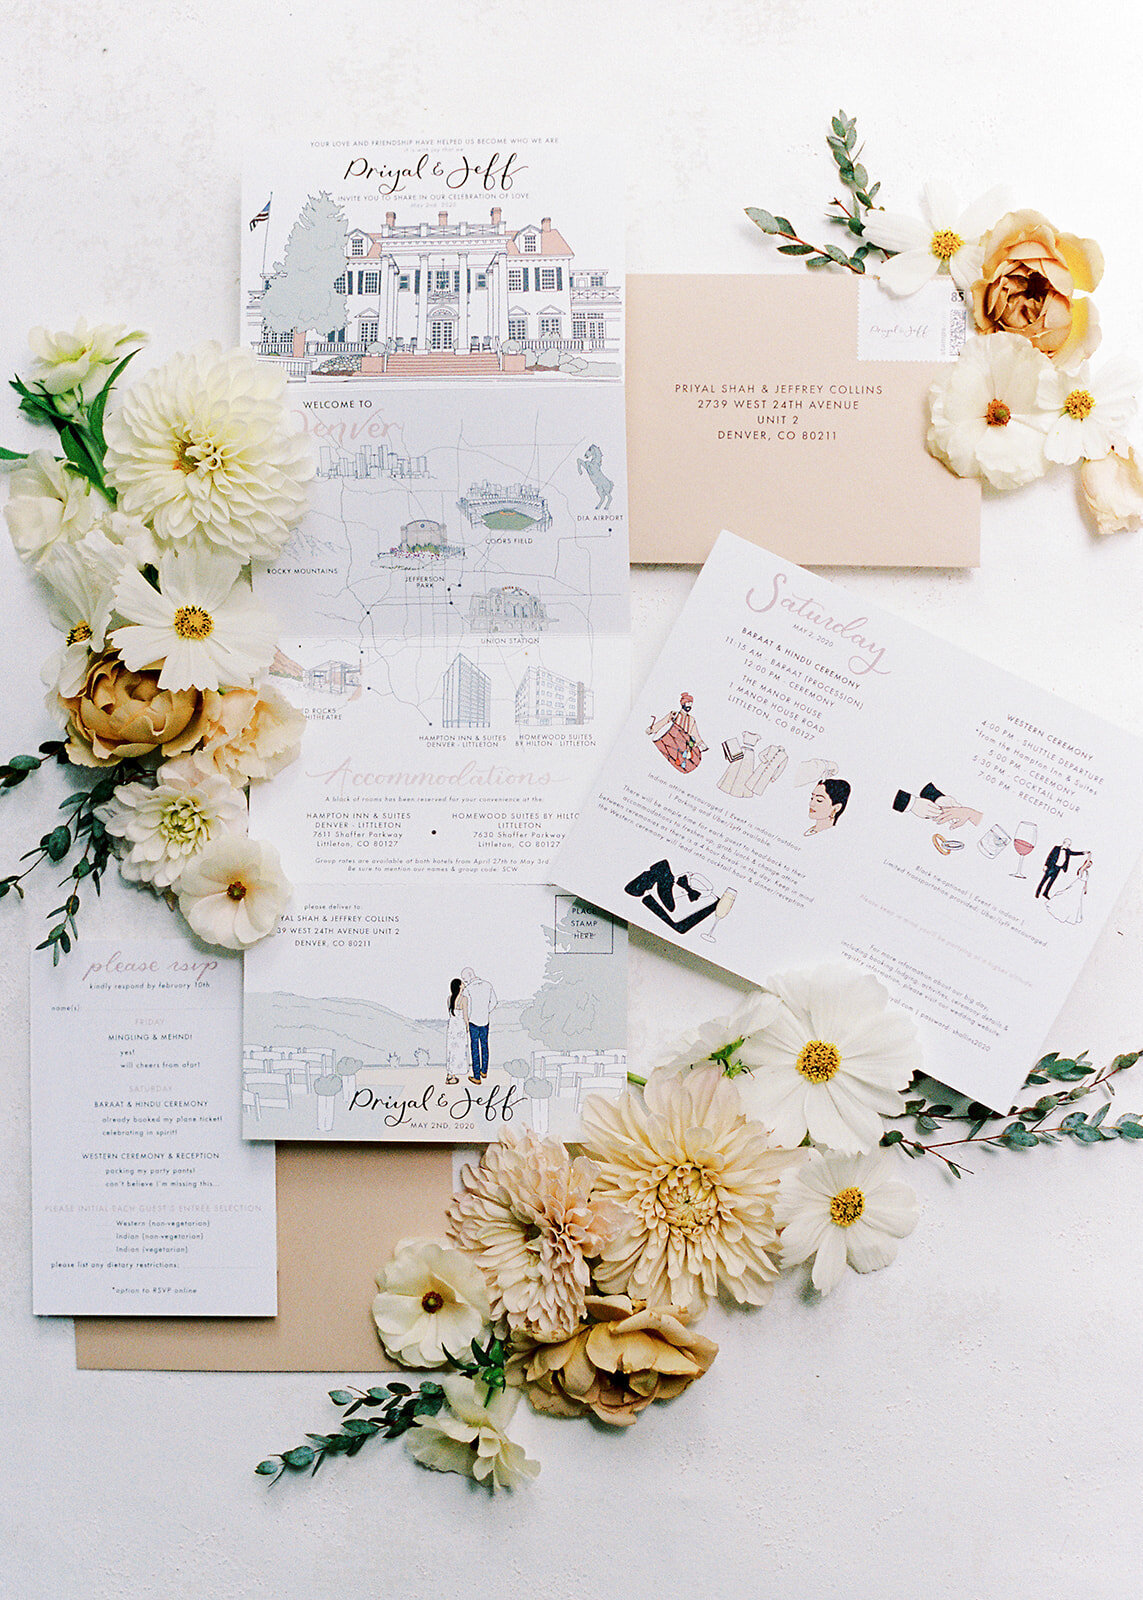 Custom wedding stationery with floral details